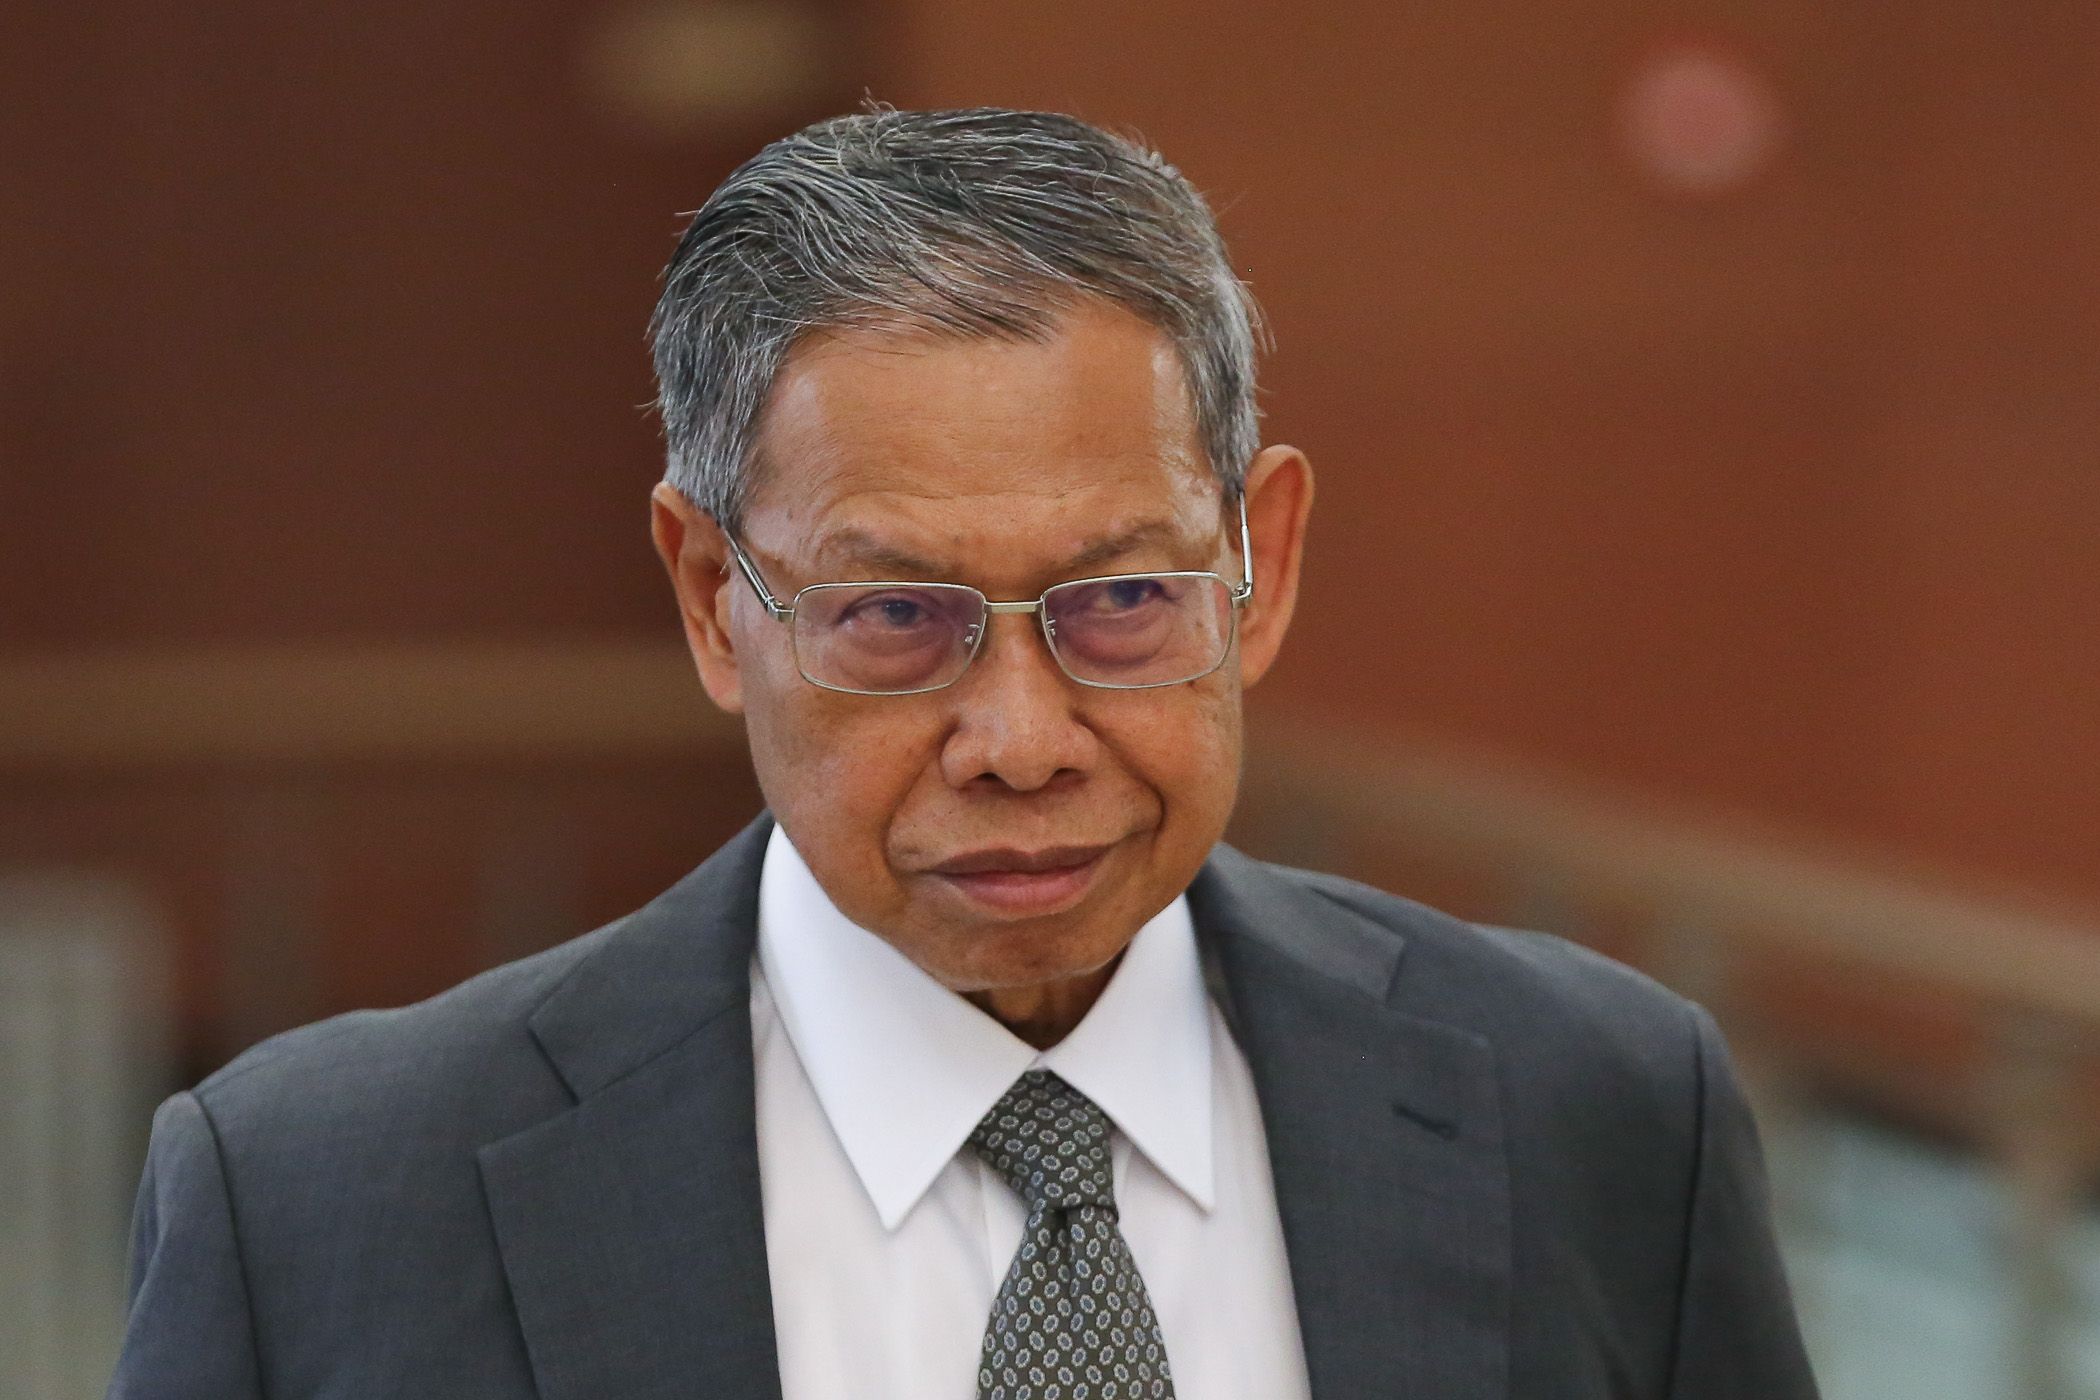 Datuk Seri Mustapa Mohamed said the government is in the process of studying a proposal to put all 35 highways under one highway trust body. — Picture by Yusof Mat Isa